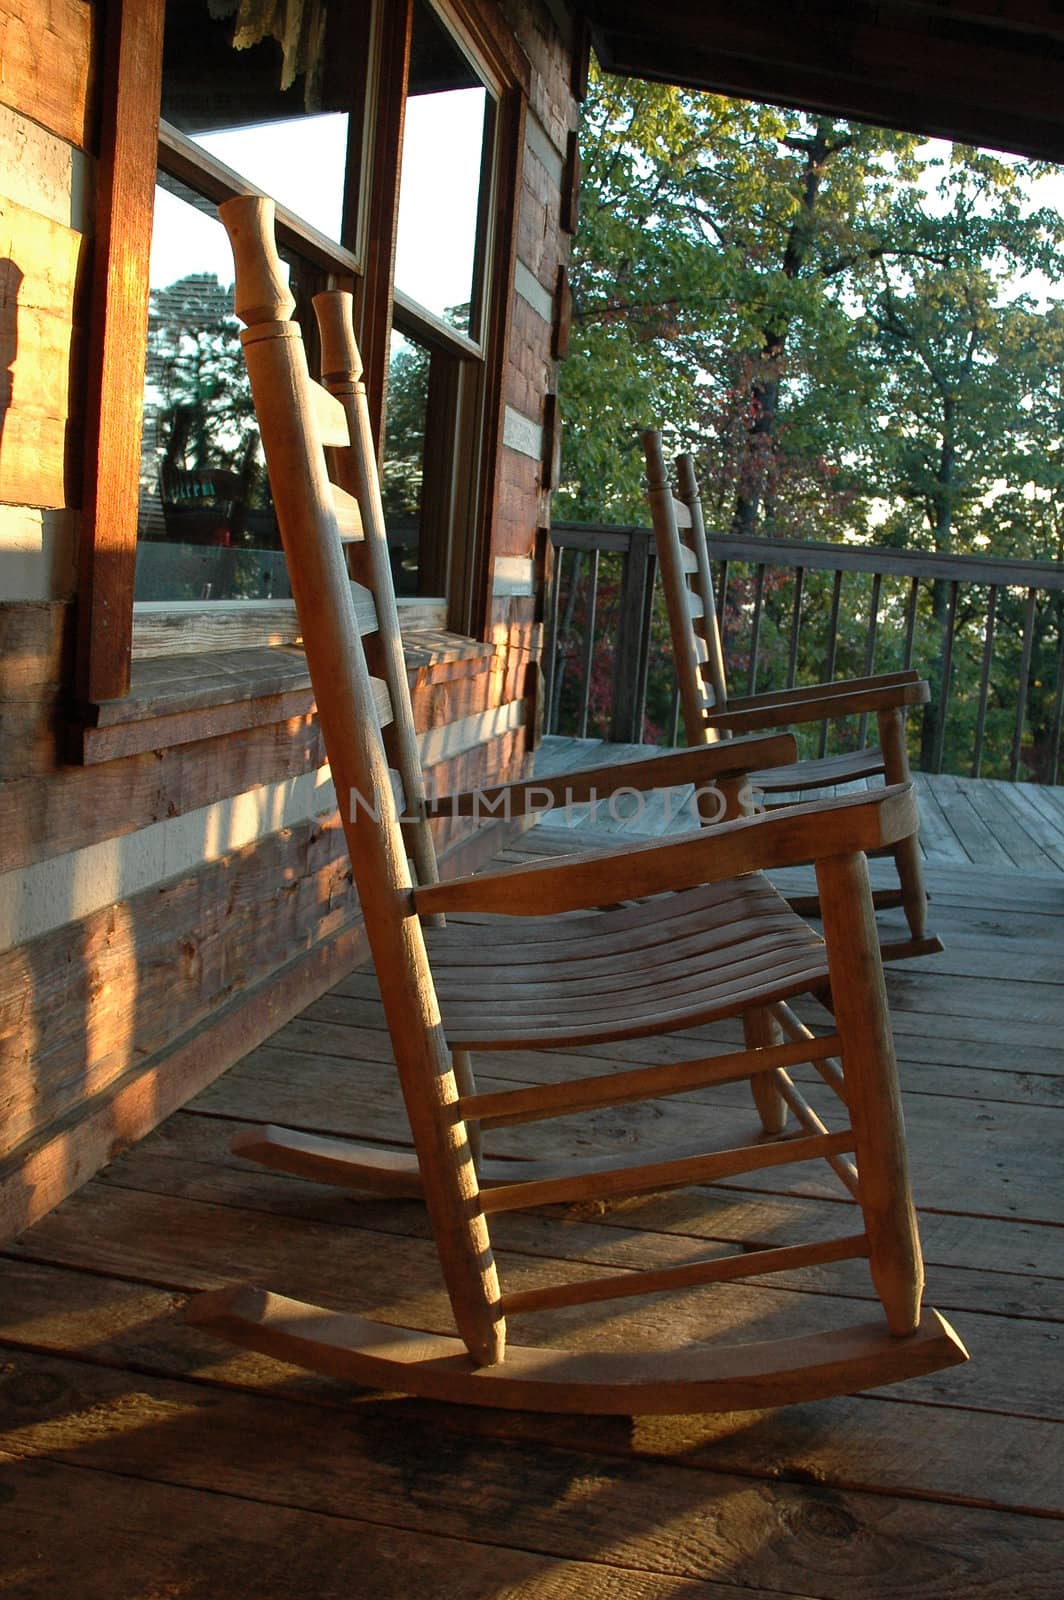 Rocking Chair Perspective by RefocusPhoto